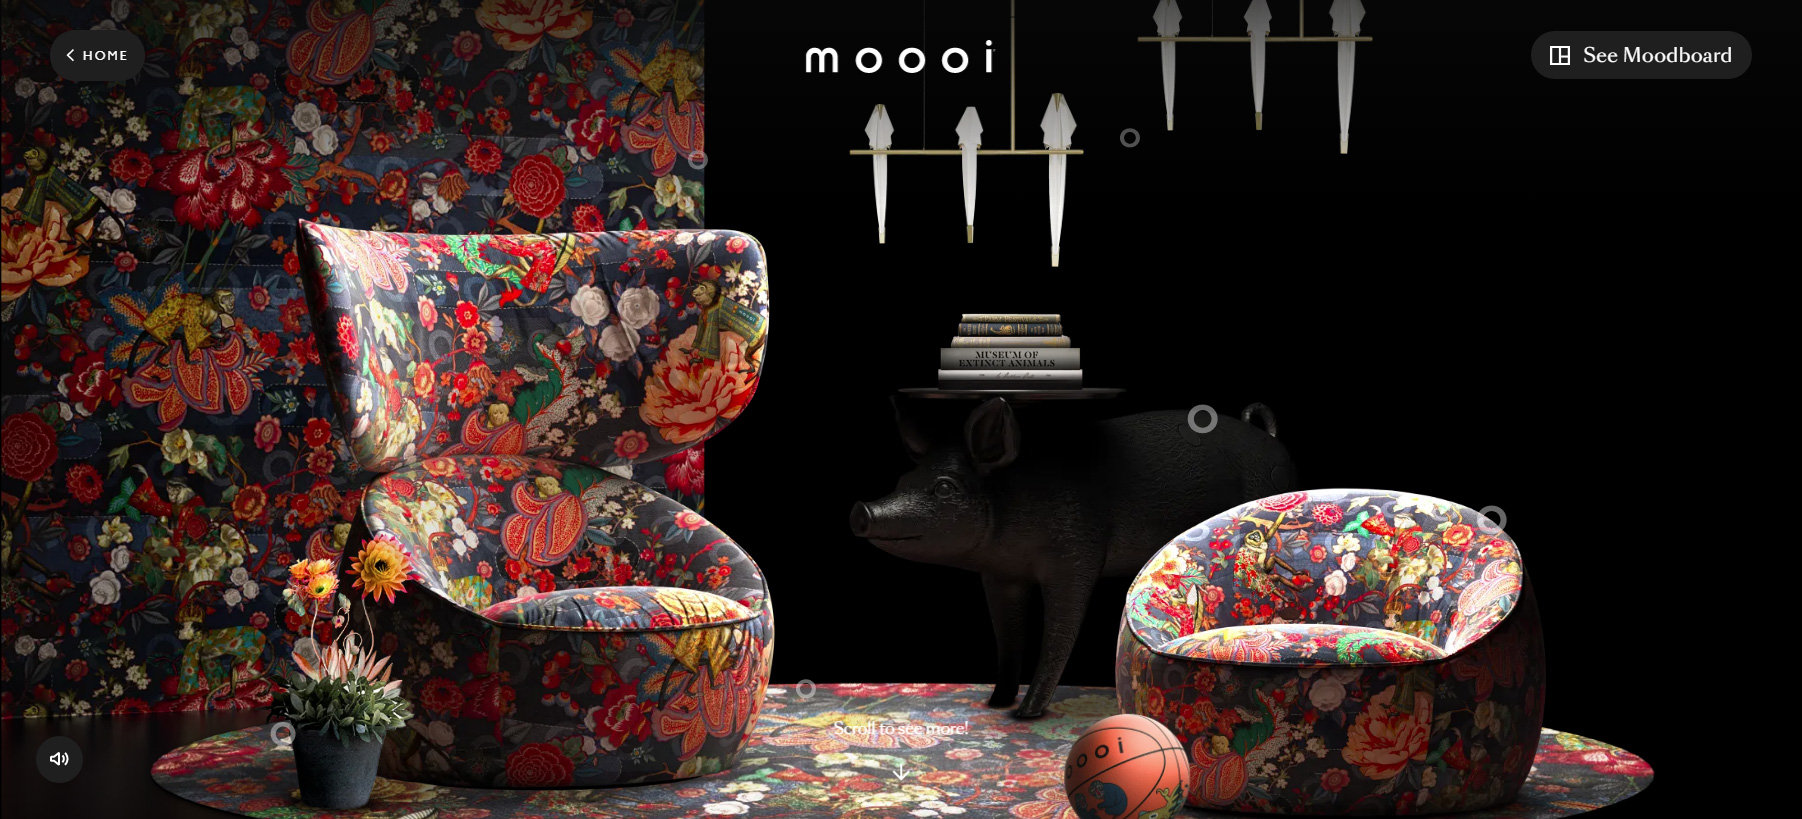 Moooi - A Life Extraordinary - Website of the Month